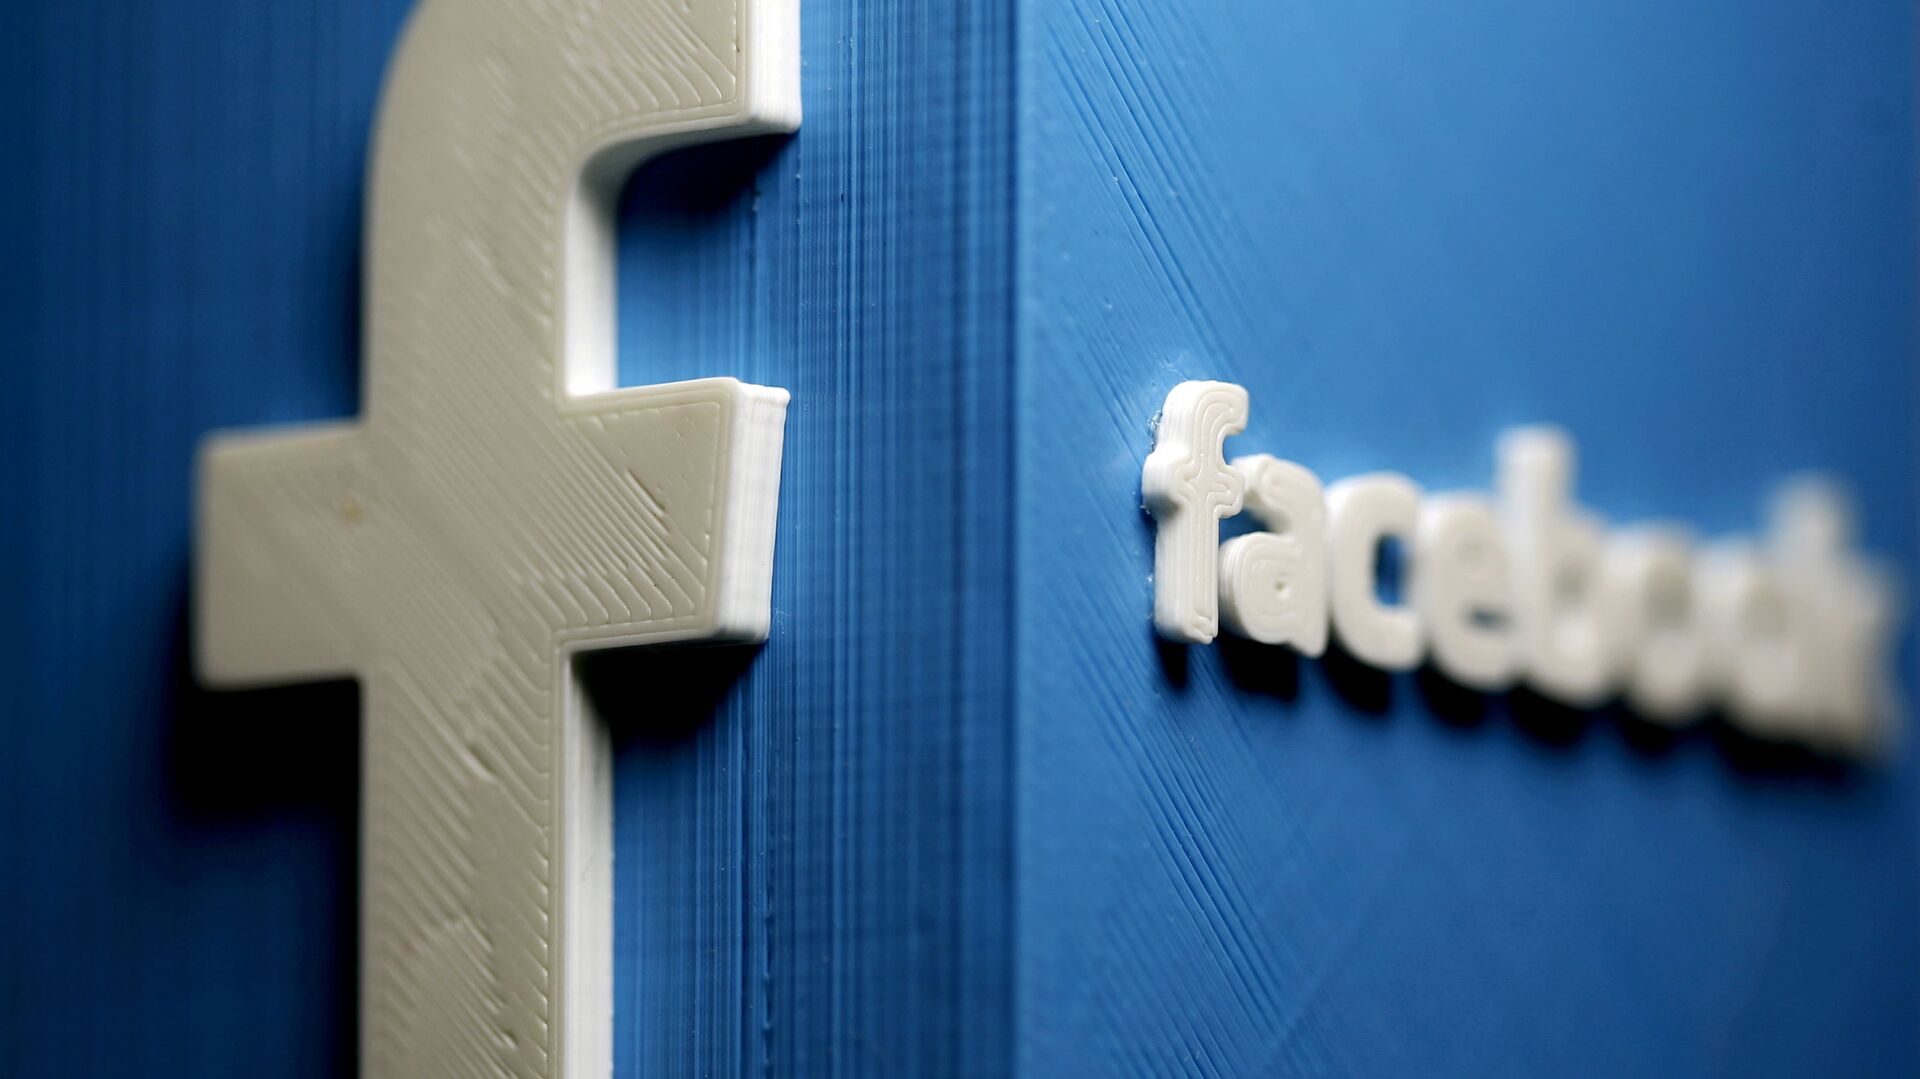 A 3D plastic representation of the Facebook logo is seen in this illustration in Zenica, Bosnia and Herzegovina, May 13, 2015. REUTERS/Dado Ruvic//File Photo/File Photo - Sputnik International, 1920, 12.09.2021